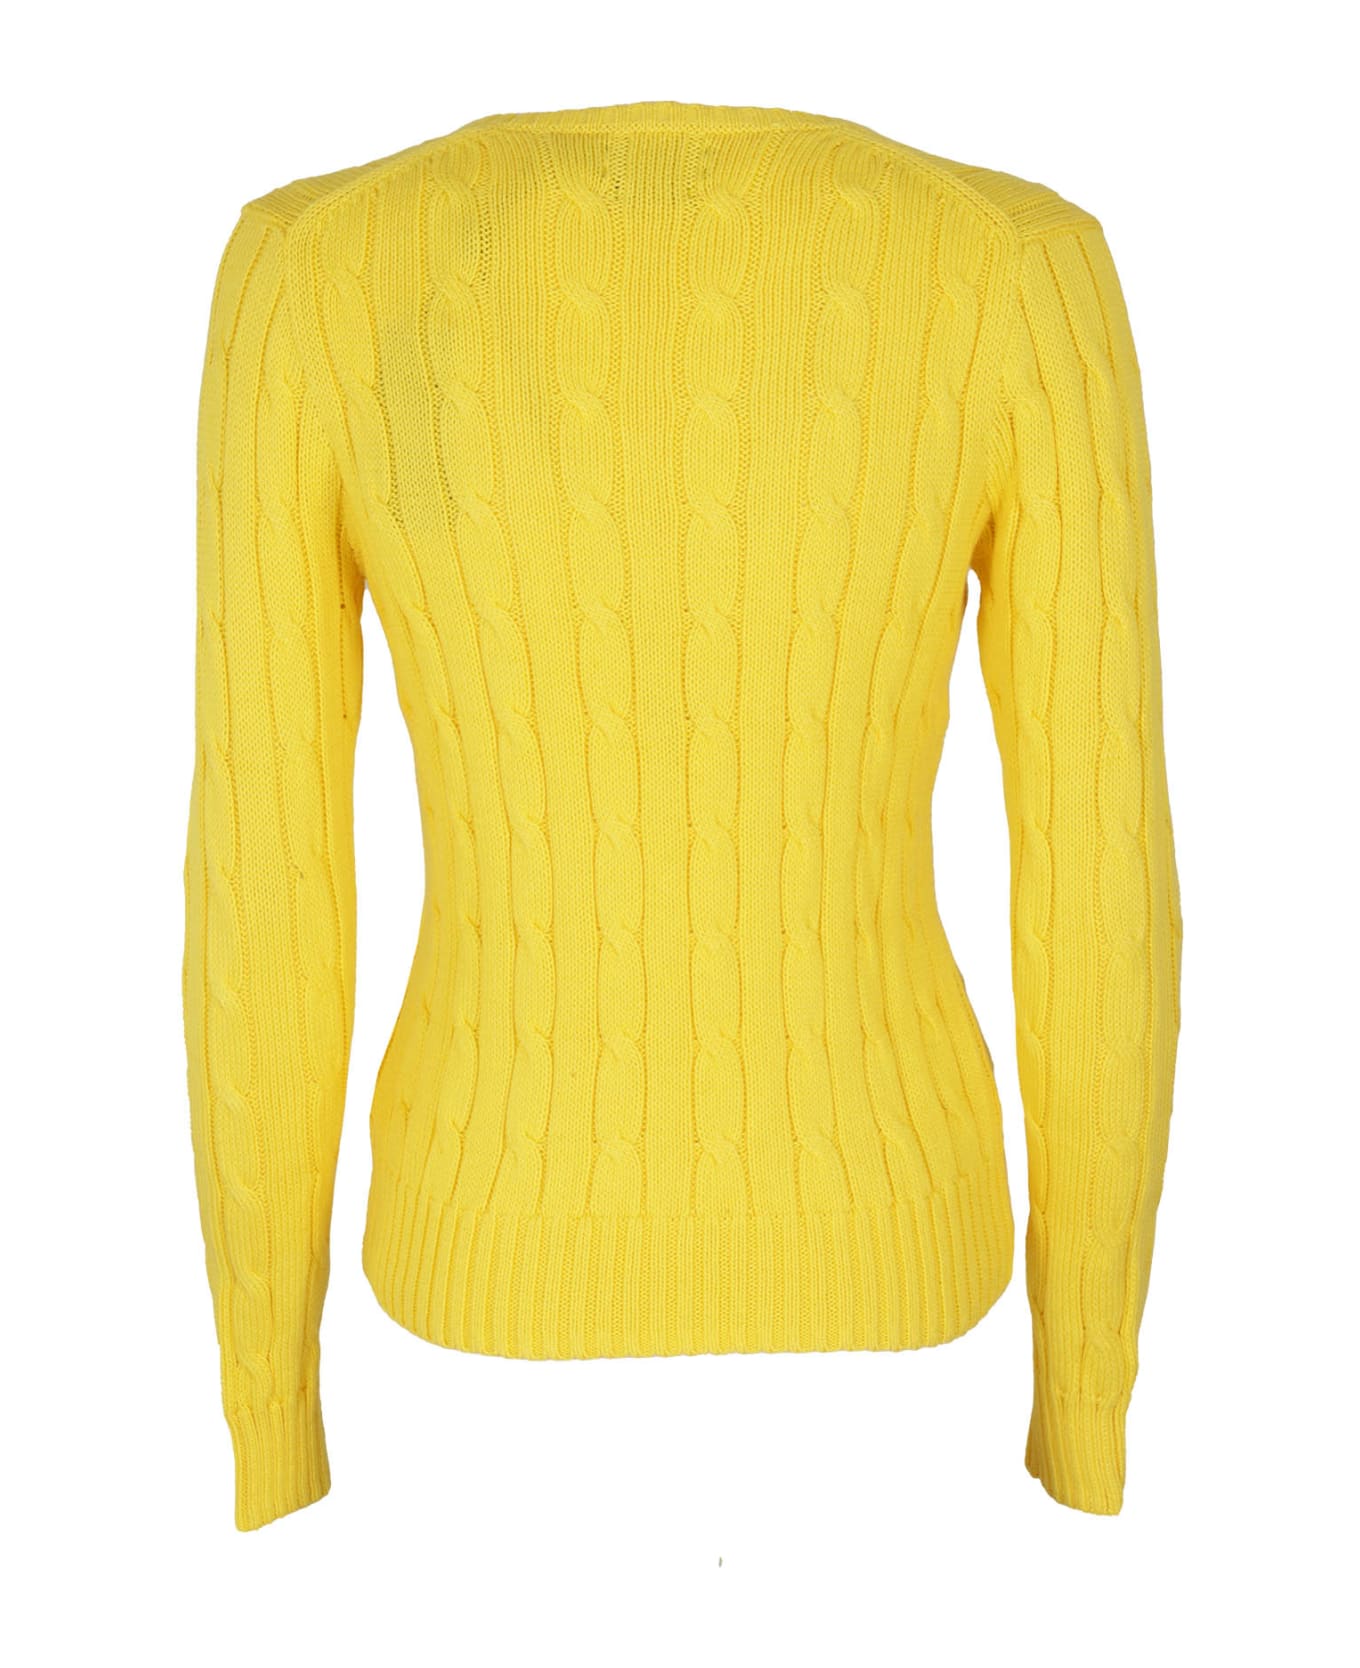 Polo Ralph Lauren Kimberly Cable-knitted V-neck Jumper - Trainer Yellow ニットウェア